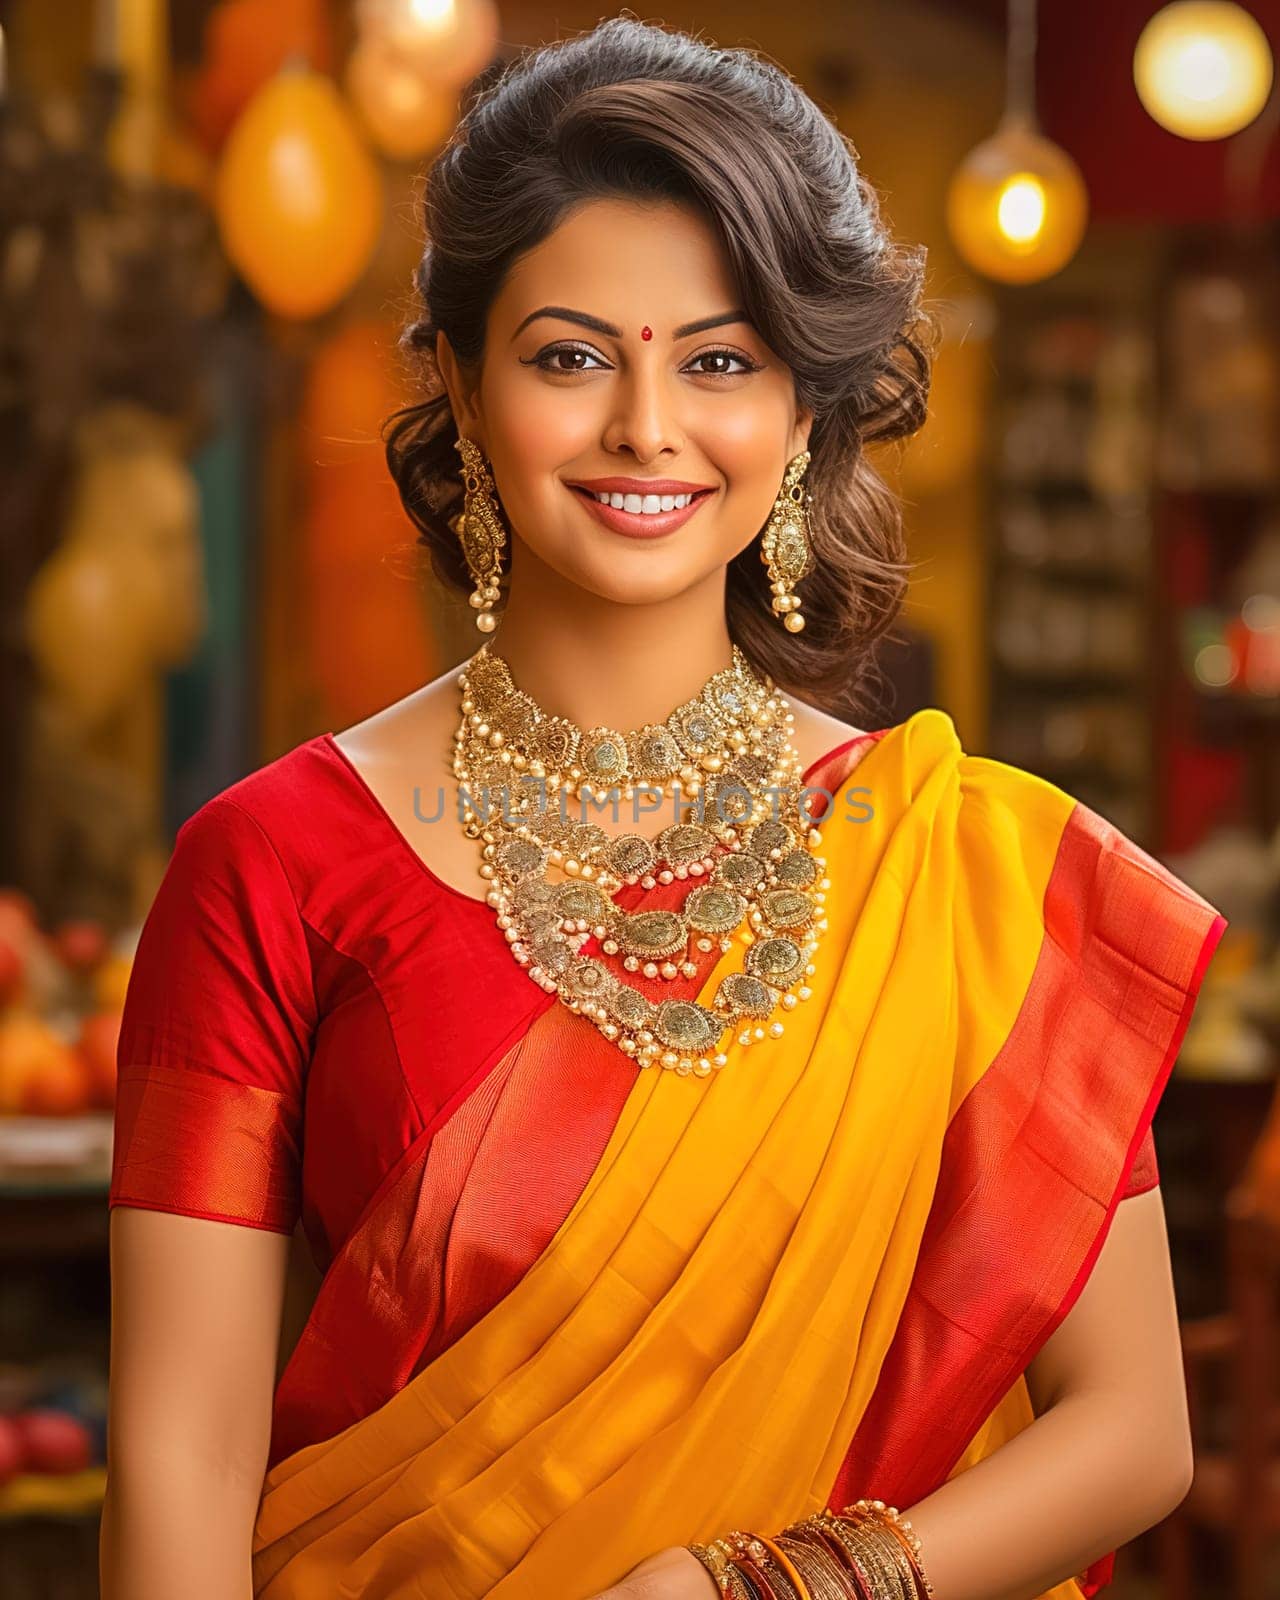 Beautiful Indian woman in red-yellow sari. by Yurich32